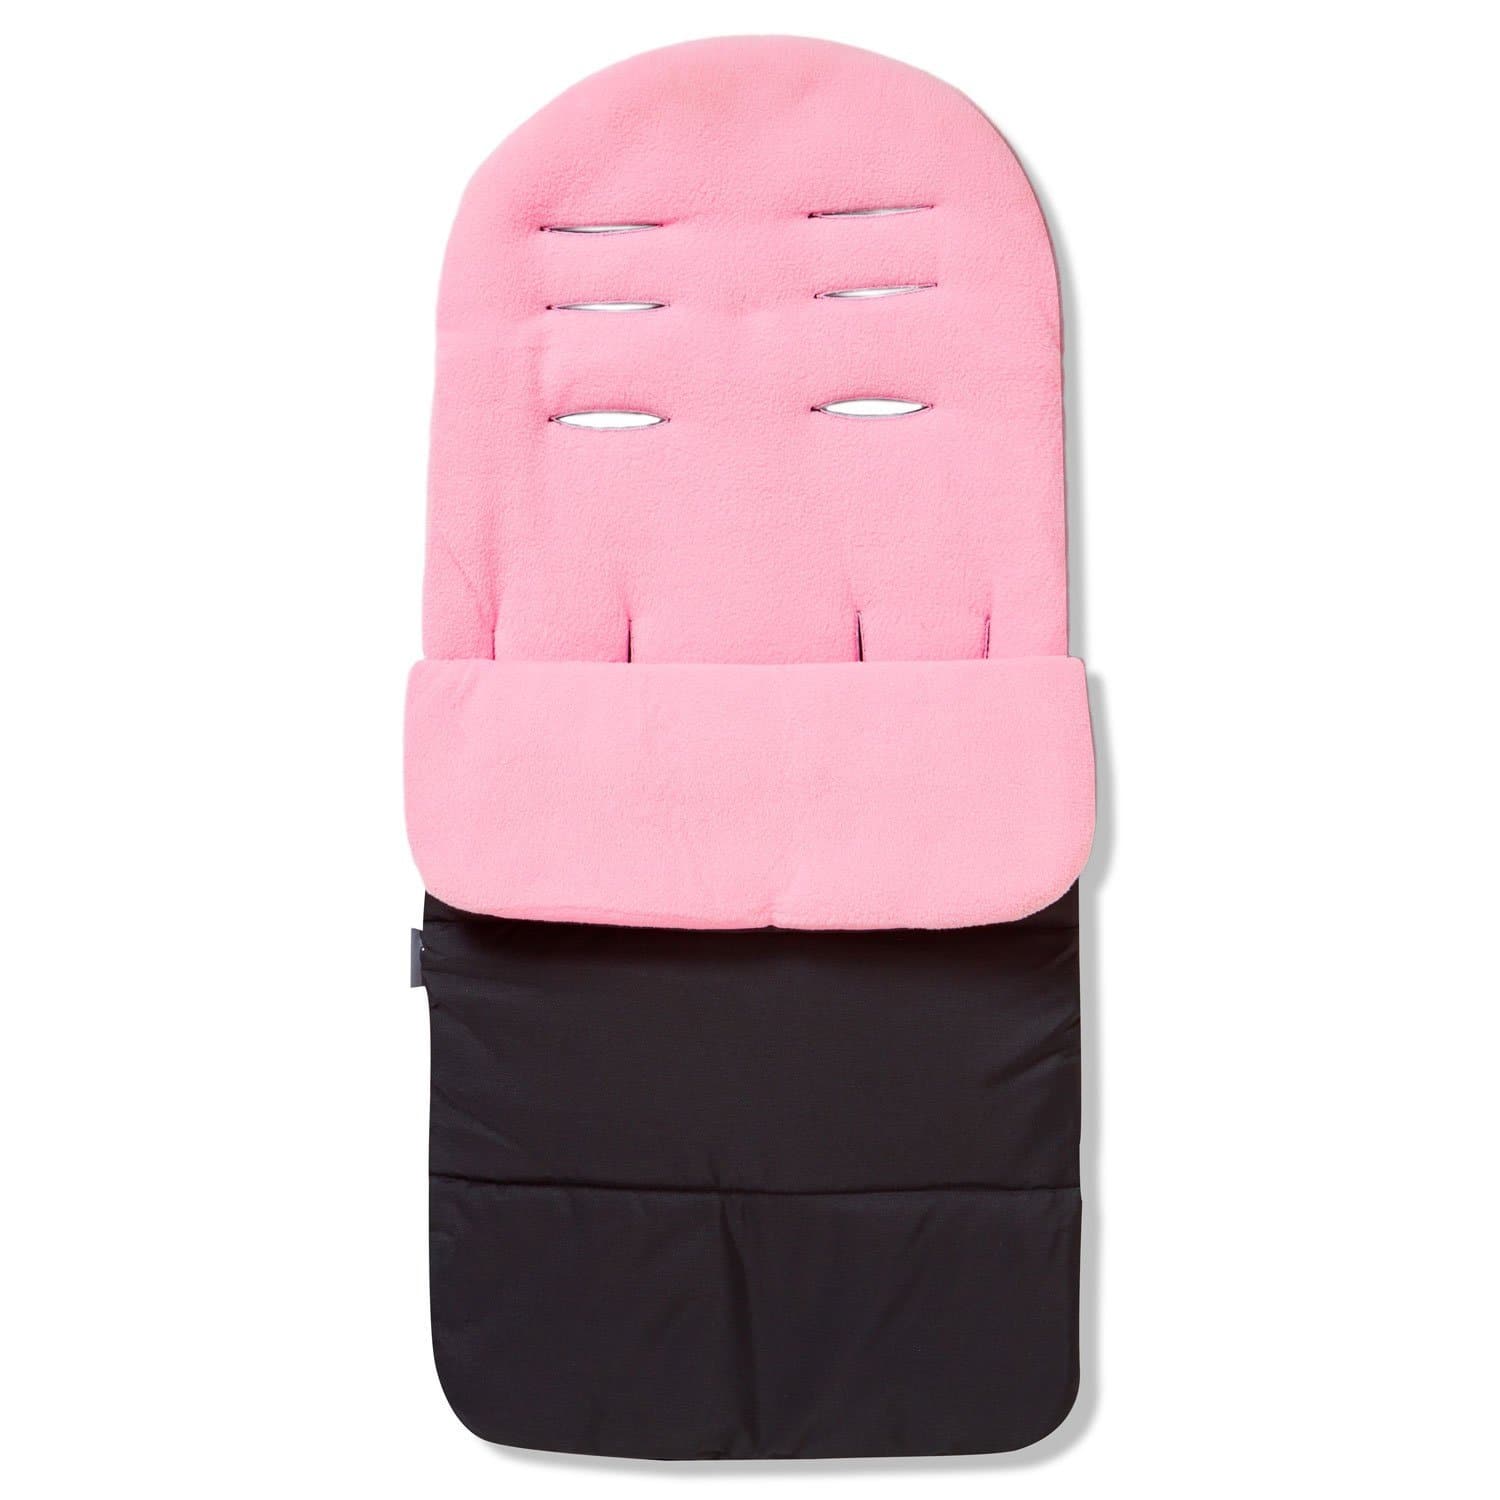 Premium Footmuff / Cosy Toes Compatible with Kiddicouture - For Your Little One